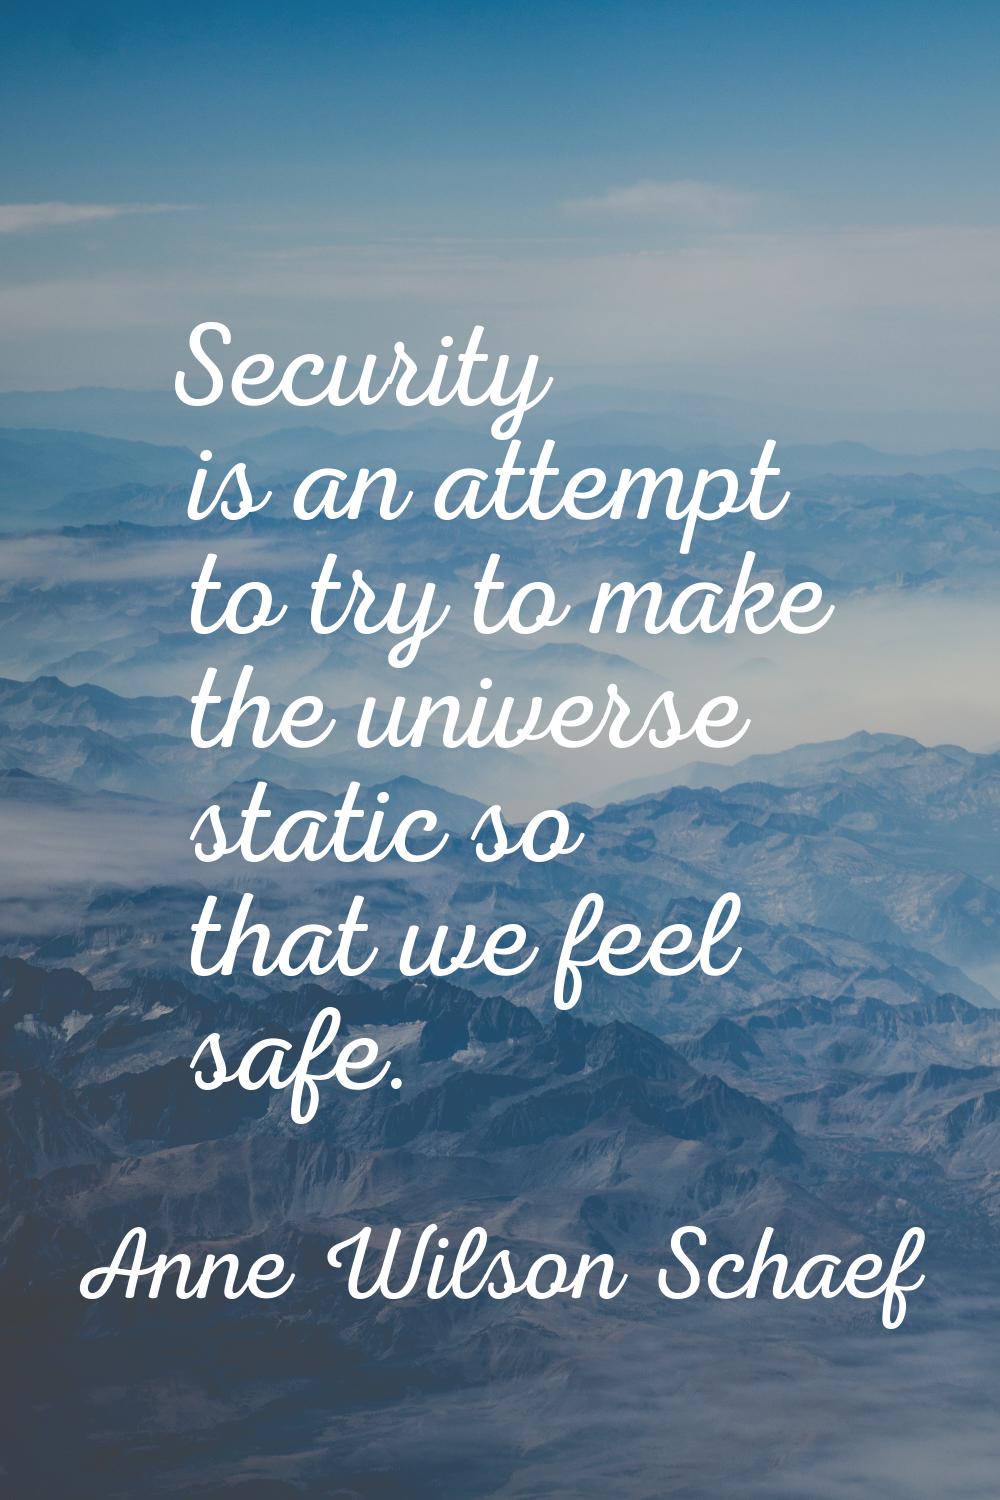 Security is an attempt to try to make the universe static so that we feel safe.